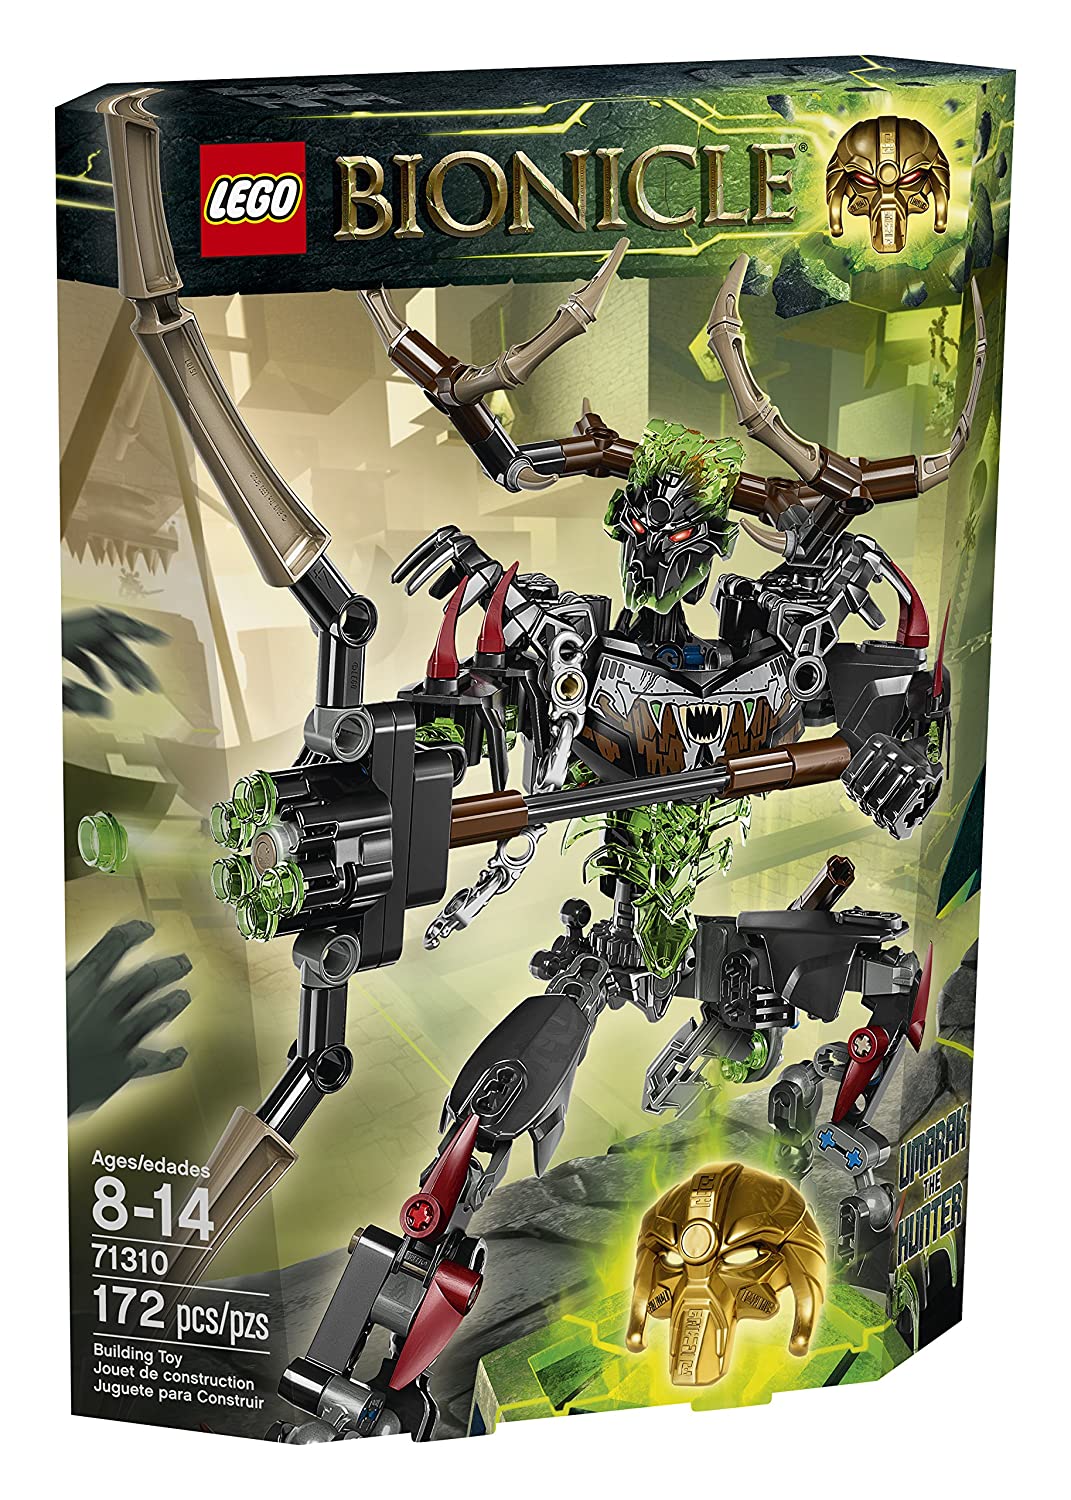 15 Best Lego BIONICLE Sets 2023 - Buying Guide & Reviews 13